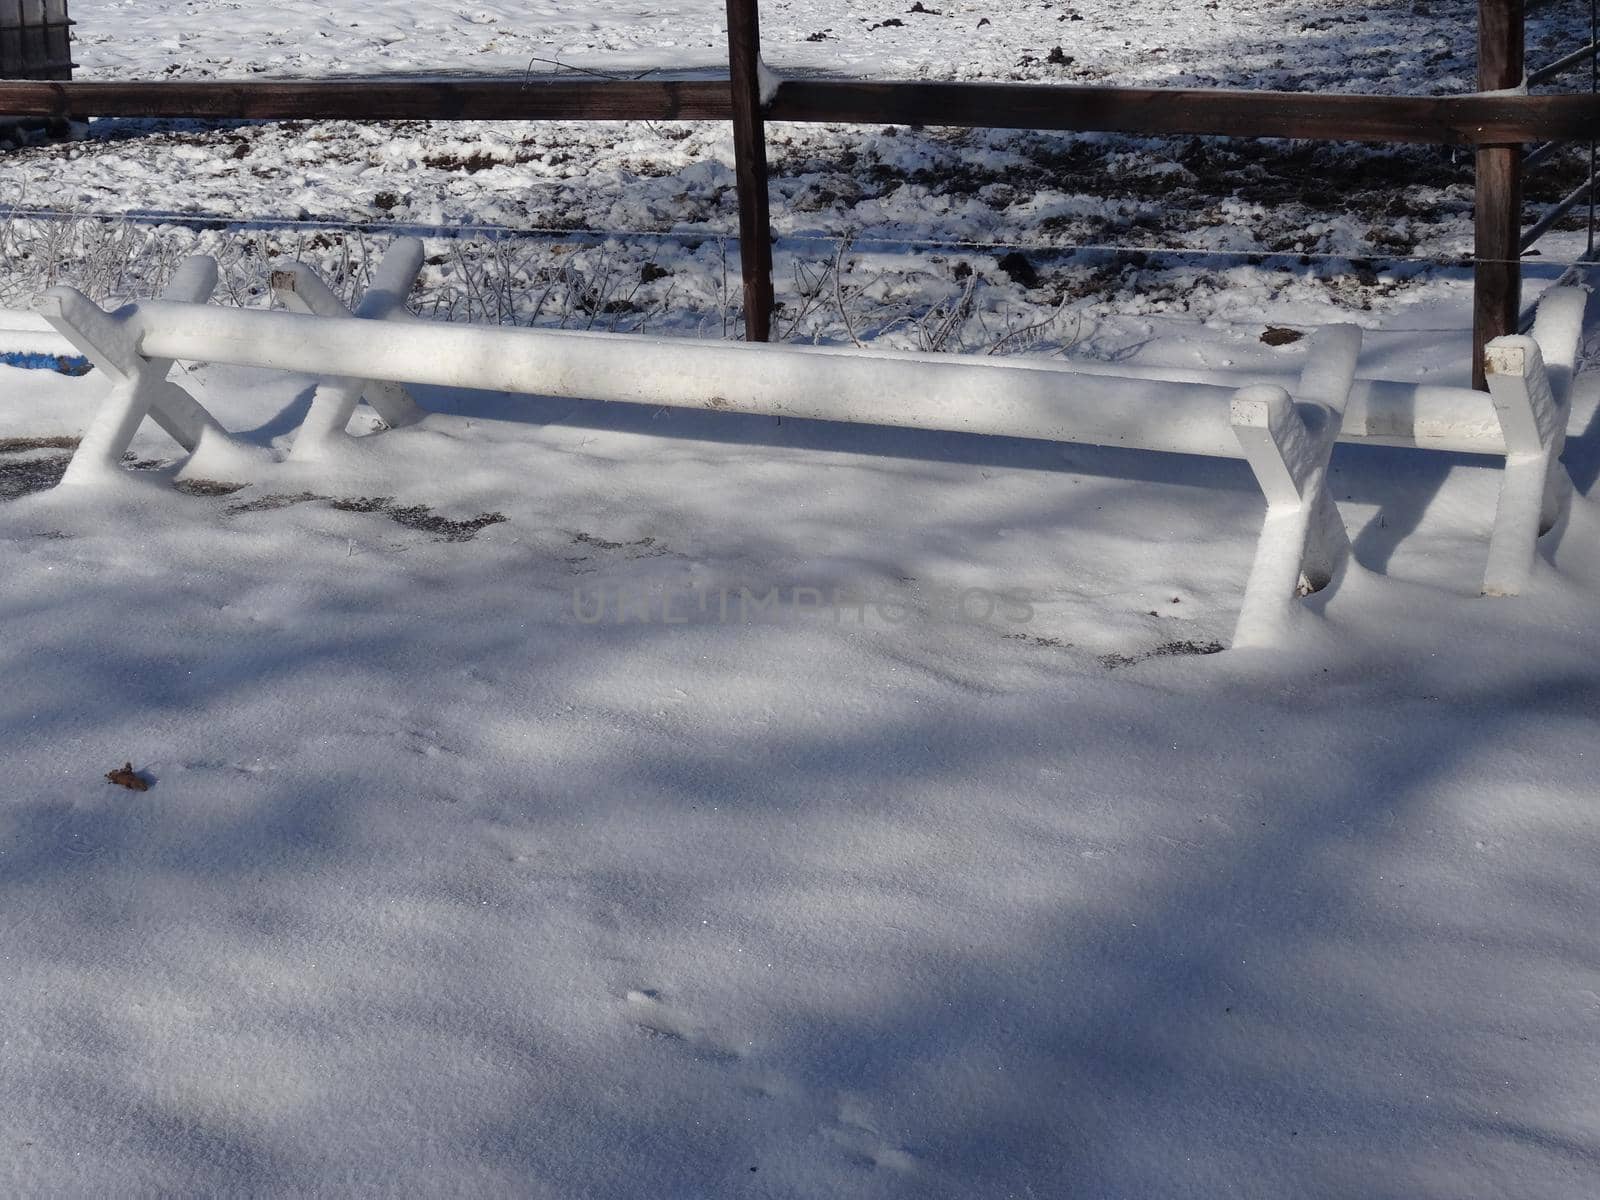 Small white obstacles on the frozen snowcovered ground in front of a fence